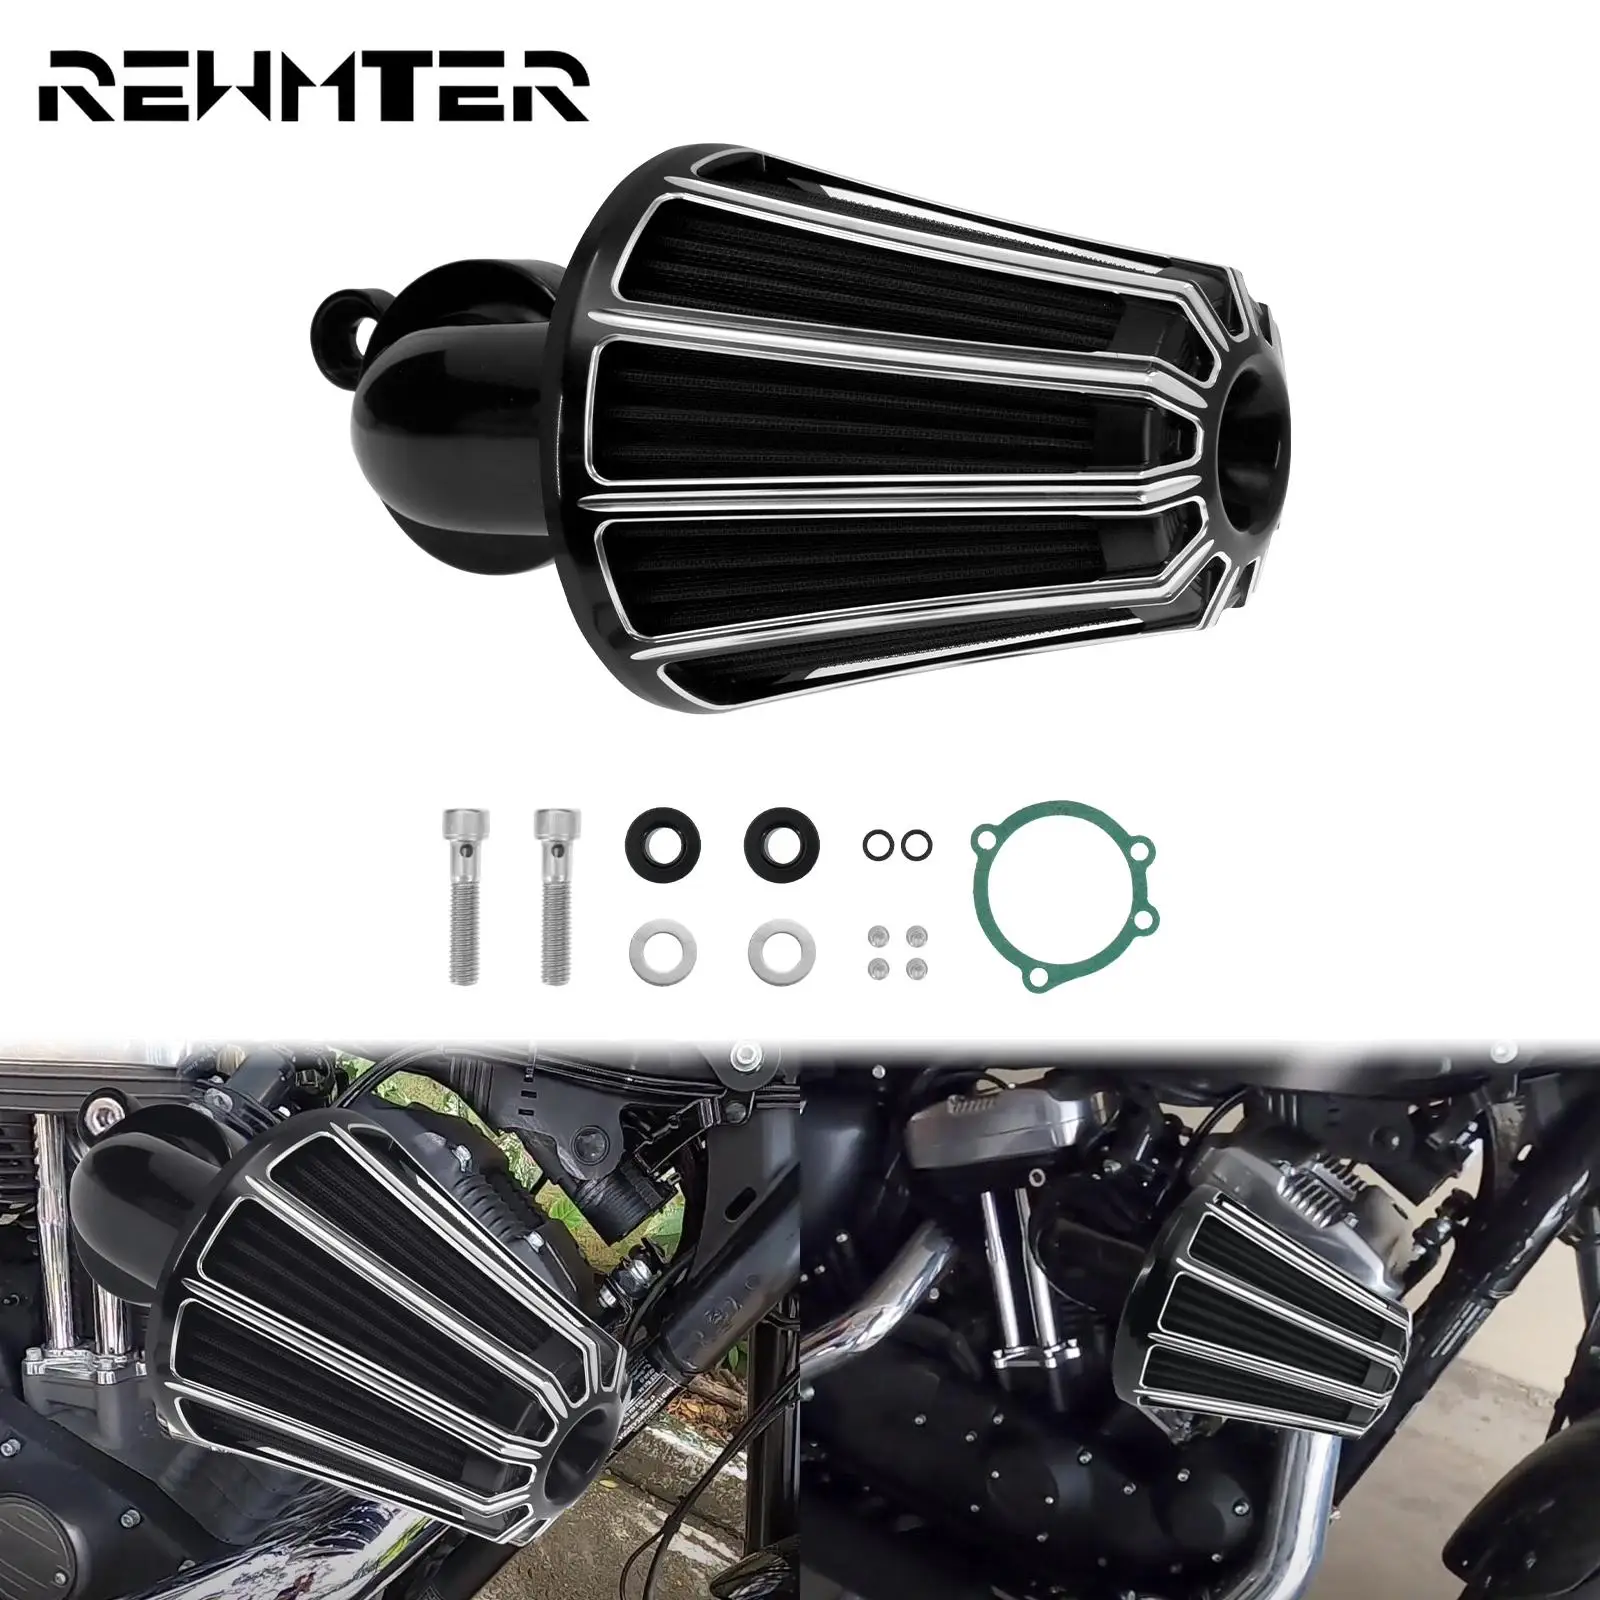 

Motorcycle CNC Air Cleaner Intake Filter System Black For Harley Sportster 883 XL1200 Seventy Two XL1200V 2004-Up Super Low